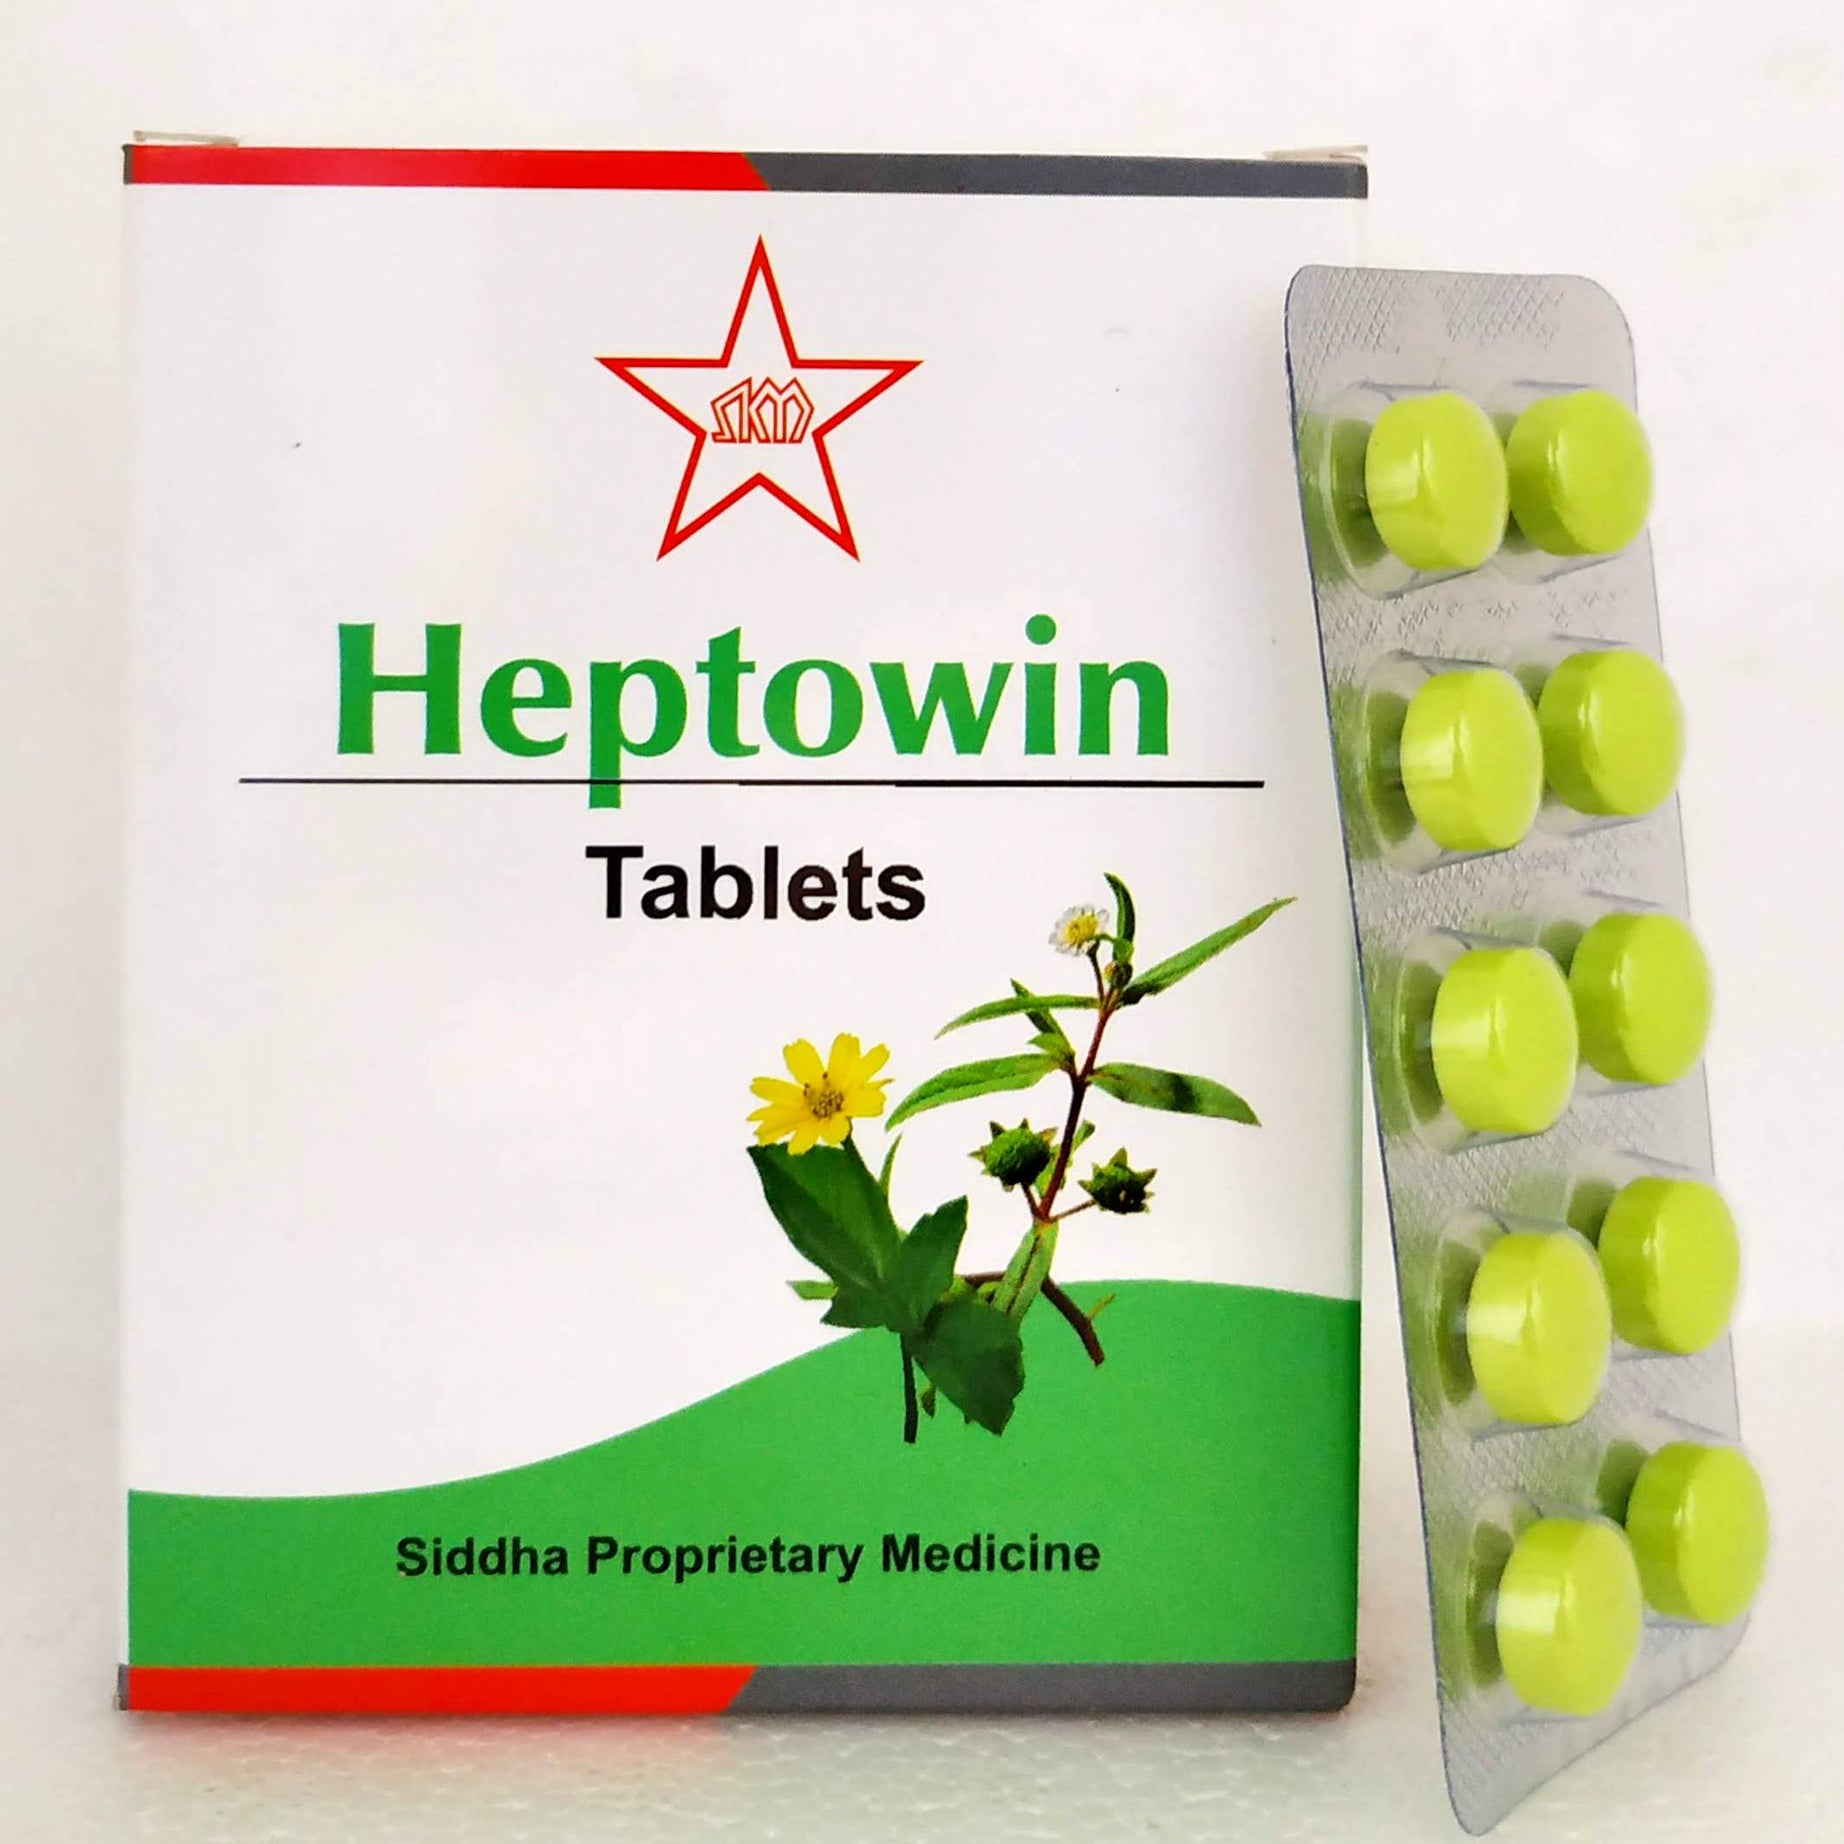 Shop Heptowin tablets - 10tablets at price 27.00 from SKM Online - Ayush Care